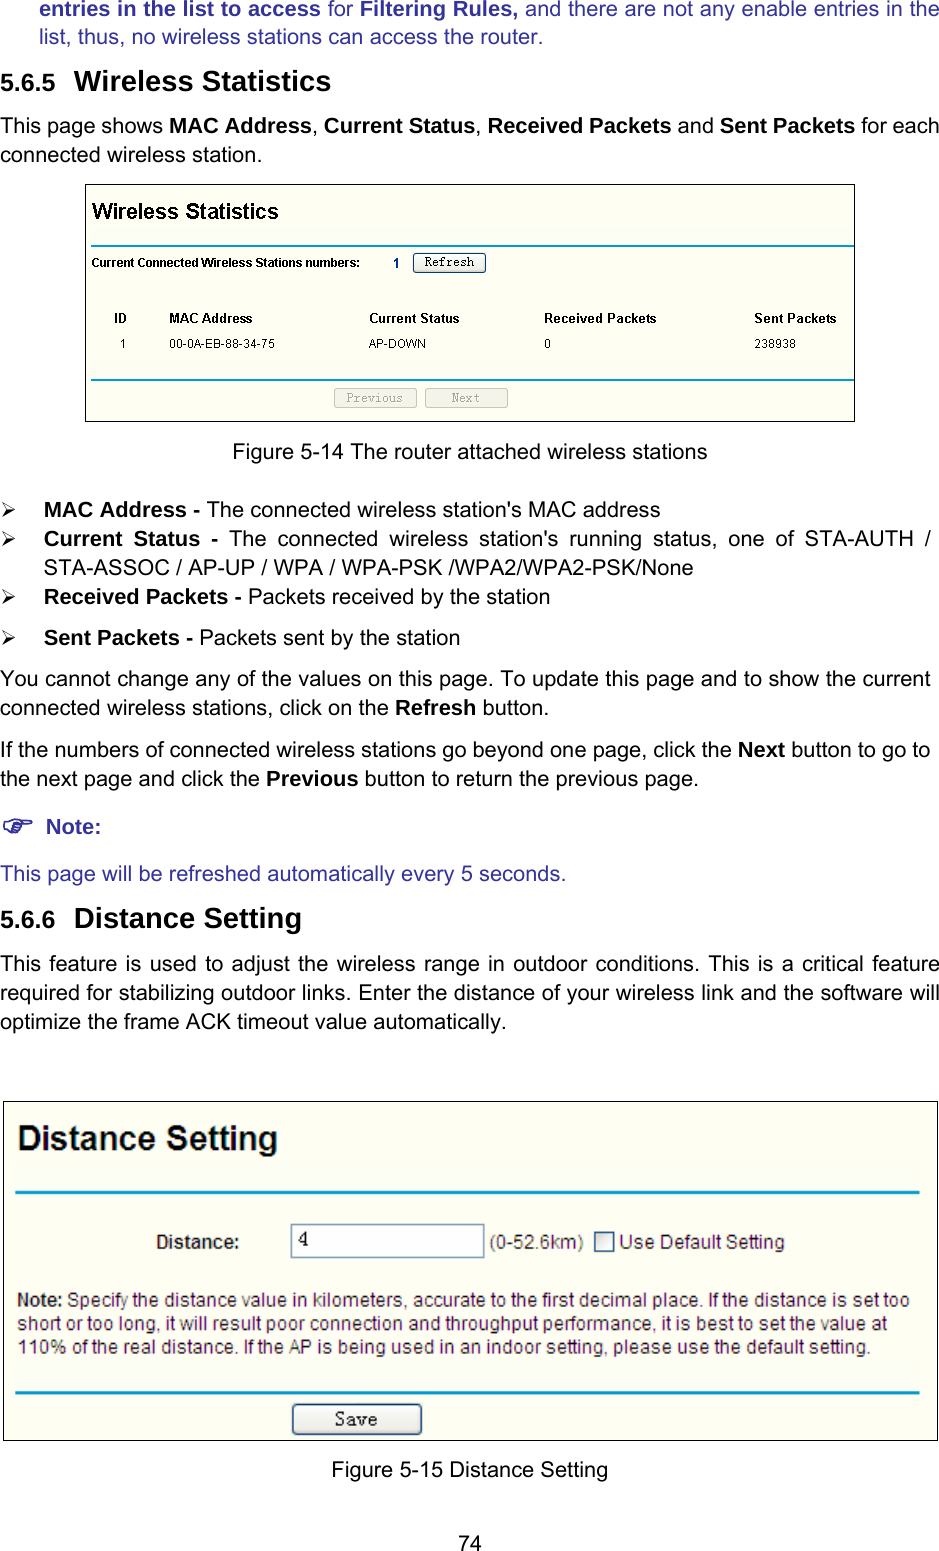  74 entries in the list to access for Filtering Rules, and there are not any enable entries in the list, thus, no wireless stations can access the router. 5.6.5  Wireless Statistics This page shows MAC Address, Current Status, Received Packets and Sent Packets for each connected wireless station.  Figure 5-14 The router attached wireless stations ¾ MAC Address - The connected wireless station&apos;s MAC address ¾ Current Status - The connected wireless station&apos;s running status, one of STA-AUTH / STA-ASSOC / AP-UP / WPA / WPA-PSK /WPA2/WPA2-PSK/None ¾ Received Packets - Packets received by the station ¾ Sent Packets - Packets sent by the station You cannot change any of the values on this page. To update this page and to show the current connected wireless stations, click on the Refresh button.   If the numbers of connected wireless stations go beyond one page, click the Next button to go to the next page and click the Previous button to return the previous page. ) Note: This page will be refreshed automatically every 5 seconds. 5.6.6  Distance Setting This feature is used to adjust the wireless range in outdoor conditions. This is a critical feature required for stabilizing outdoor links. Enter the distance of your wireless link and the software will optimize the frame ACK timeout value automatically.   Figure 5-15 Distance Setting 